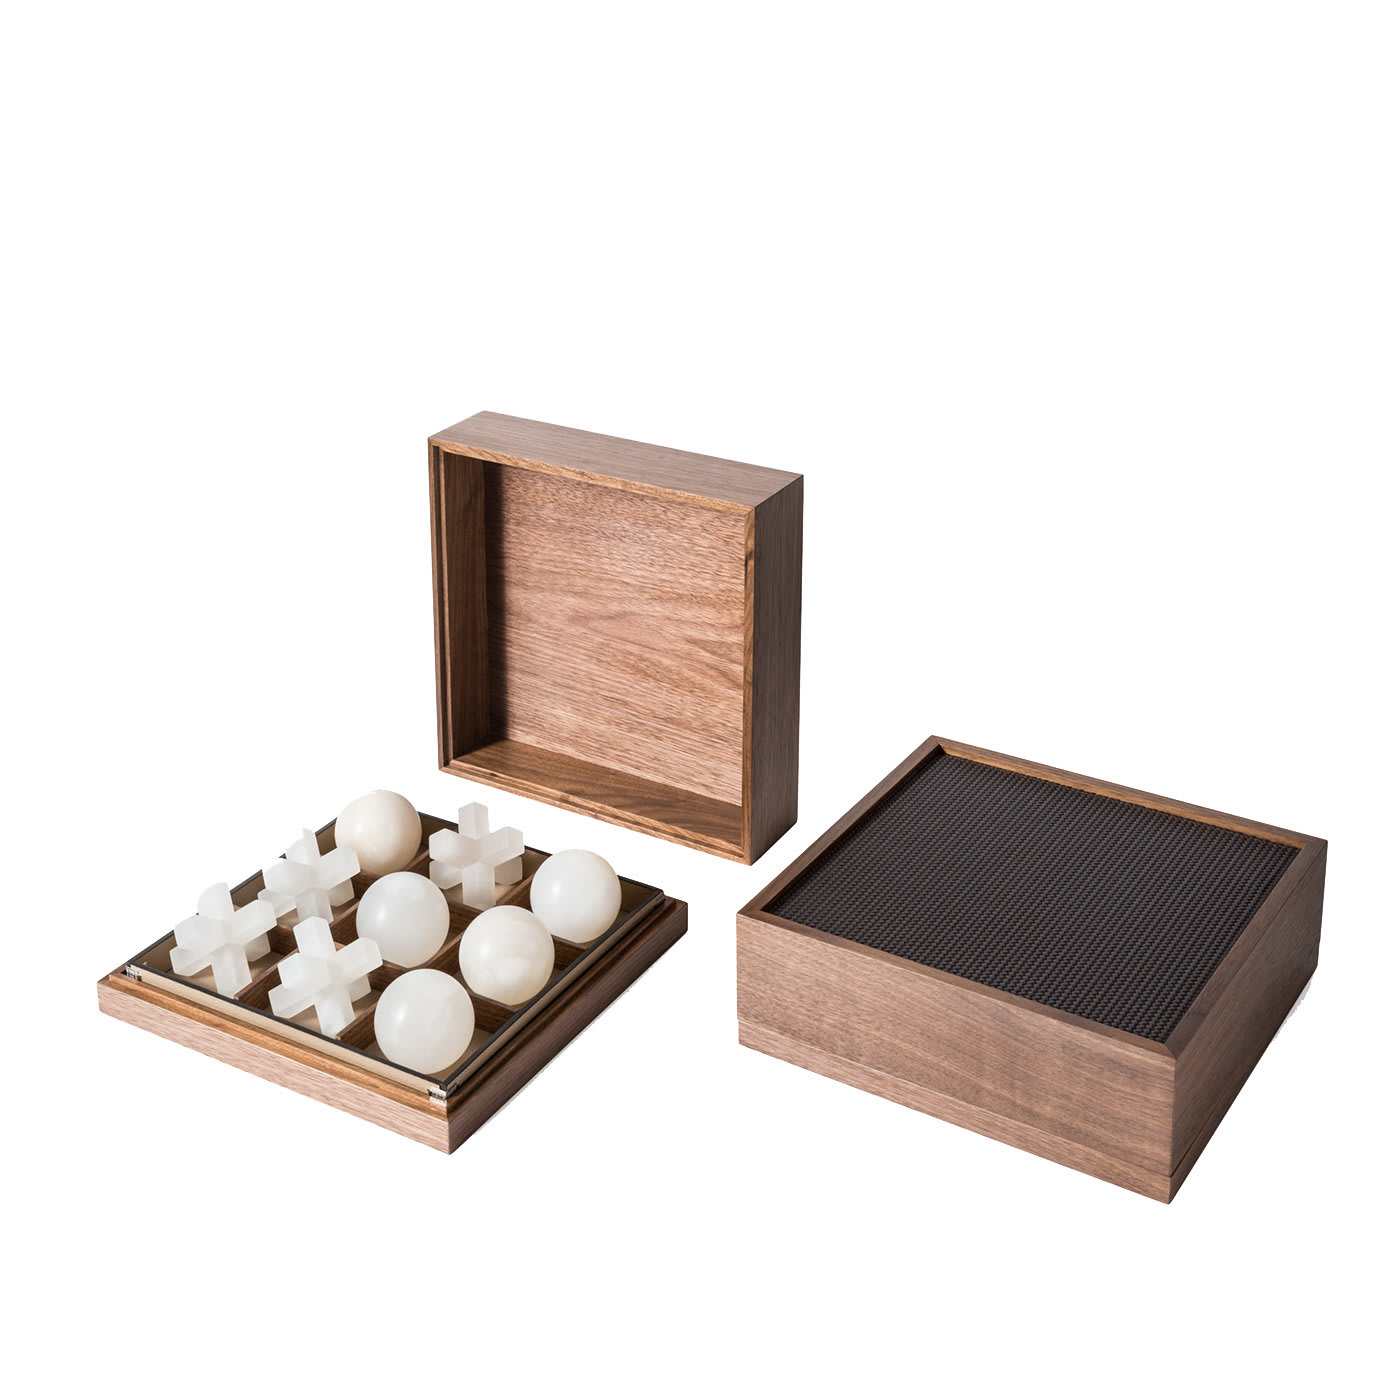 Tris Box with Alabaster Pieces - Pinetti